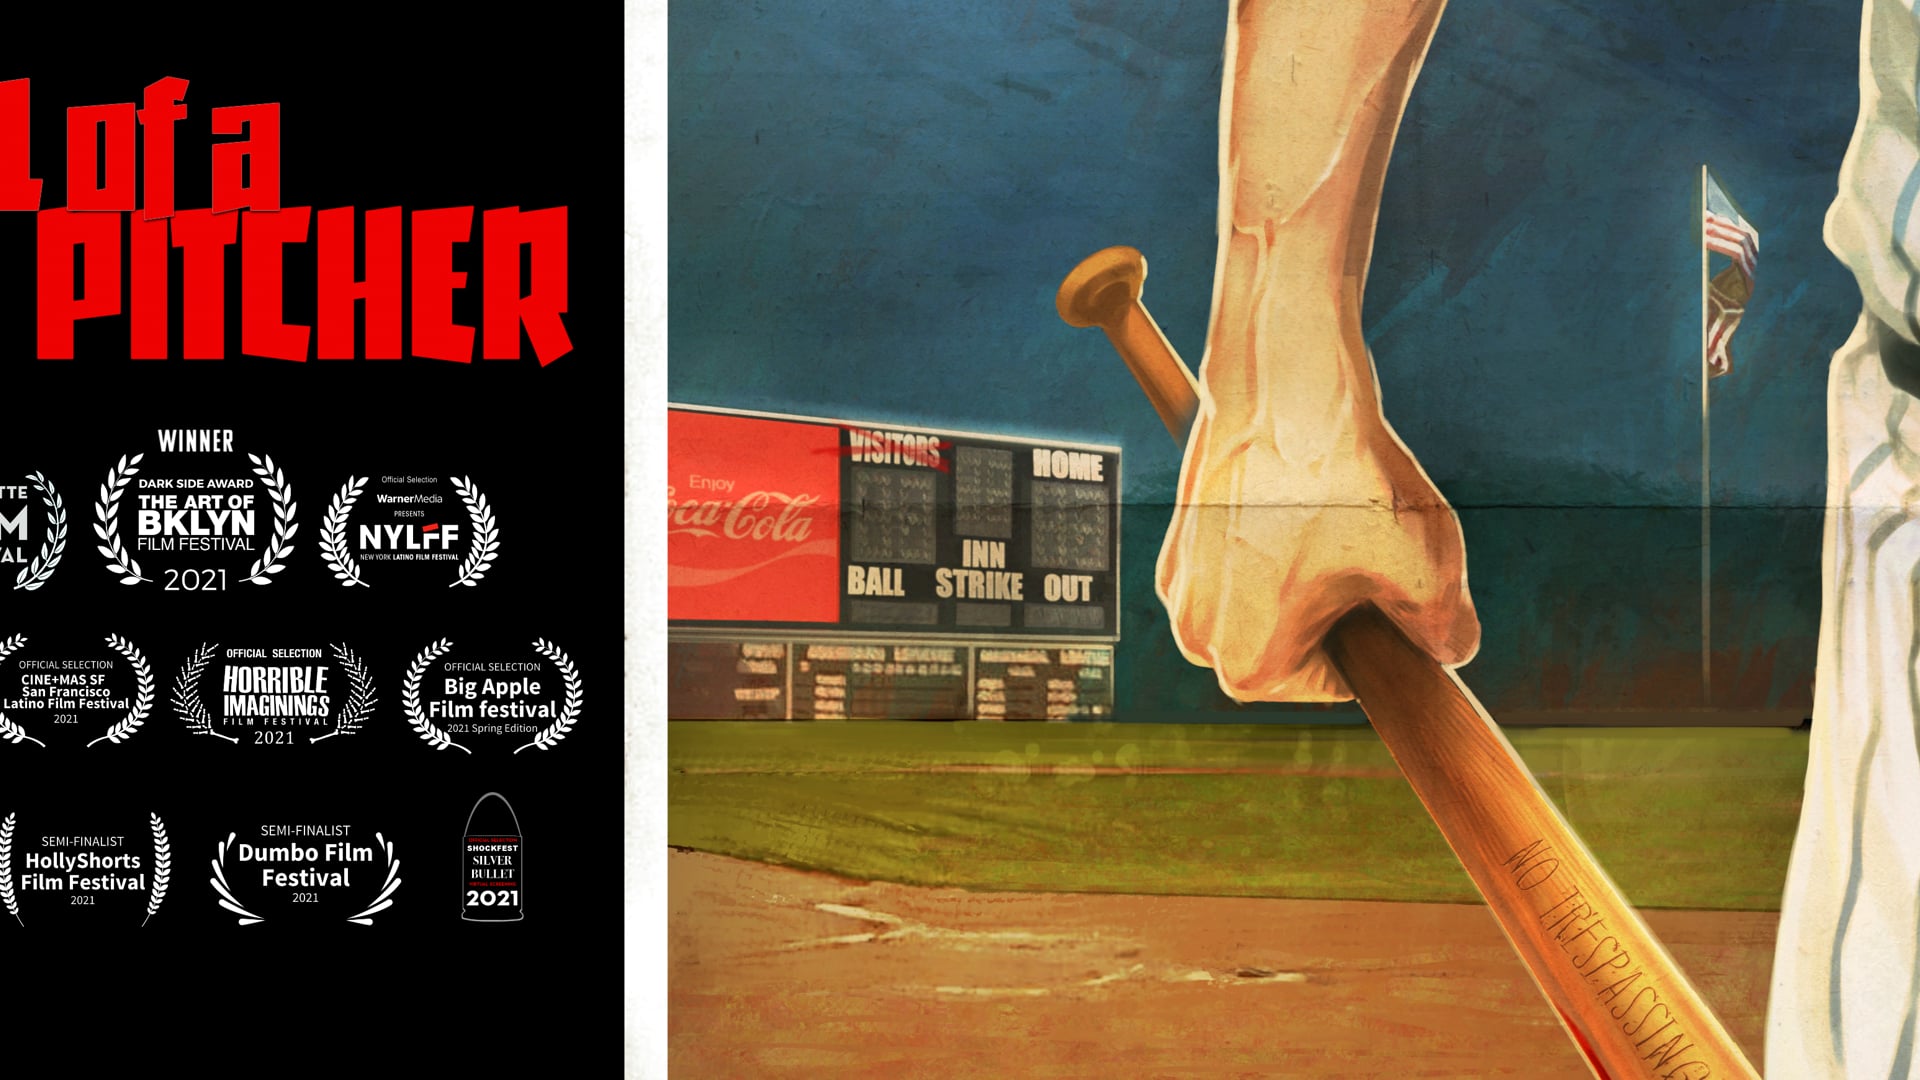 Trailer "Hell of a Pitcher"